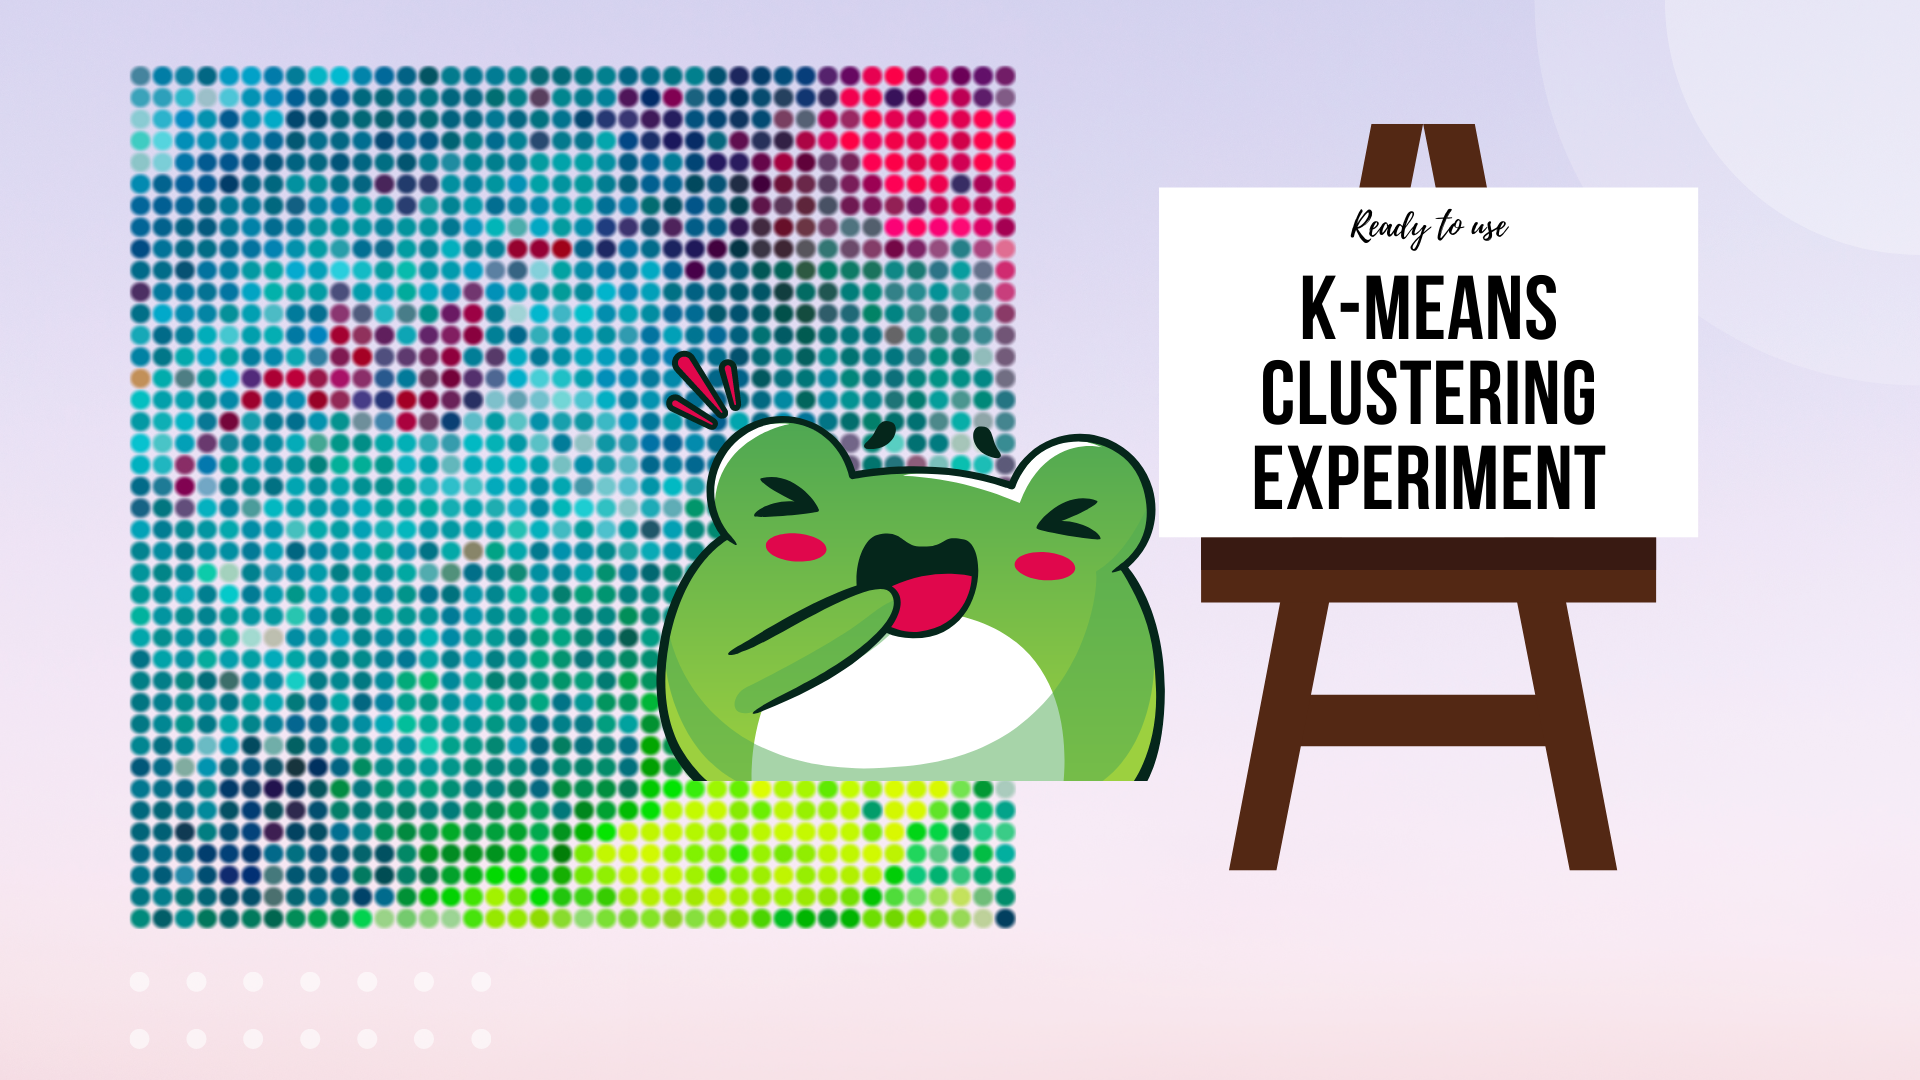 Decorative image with title K-means clustering experiment.